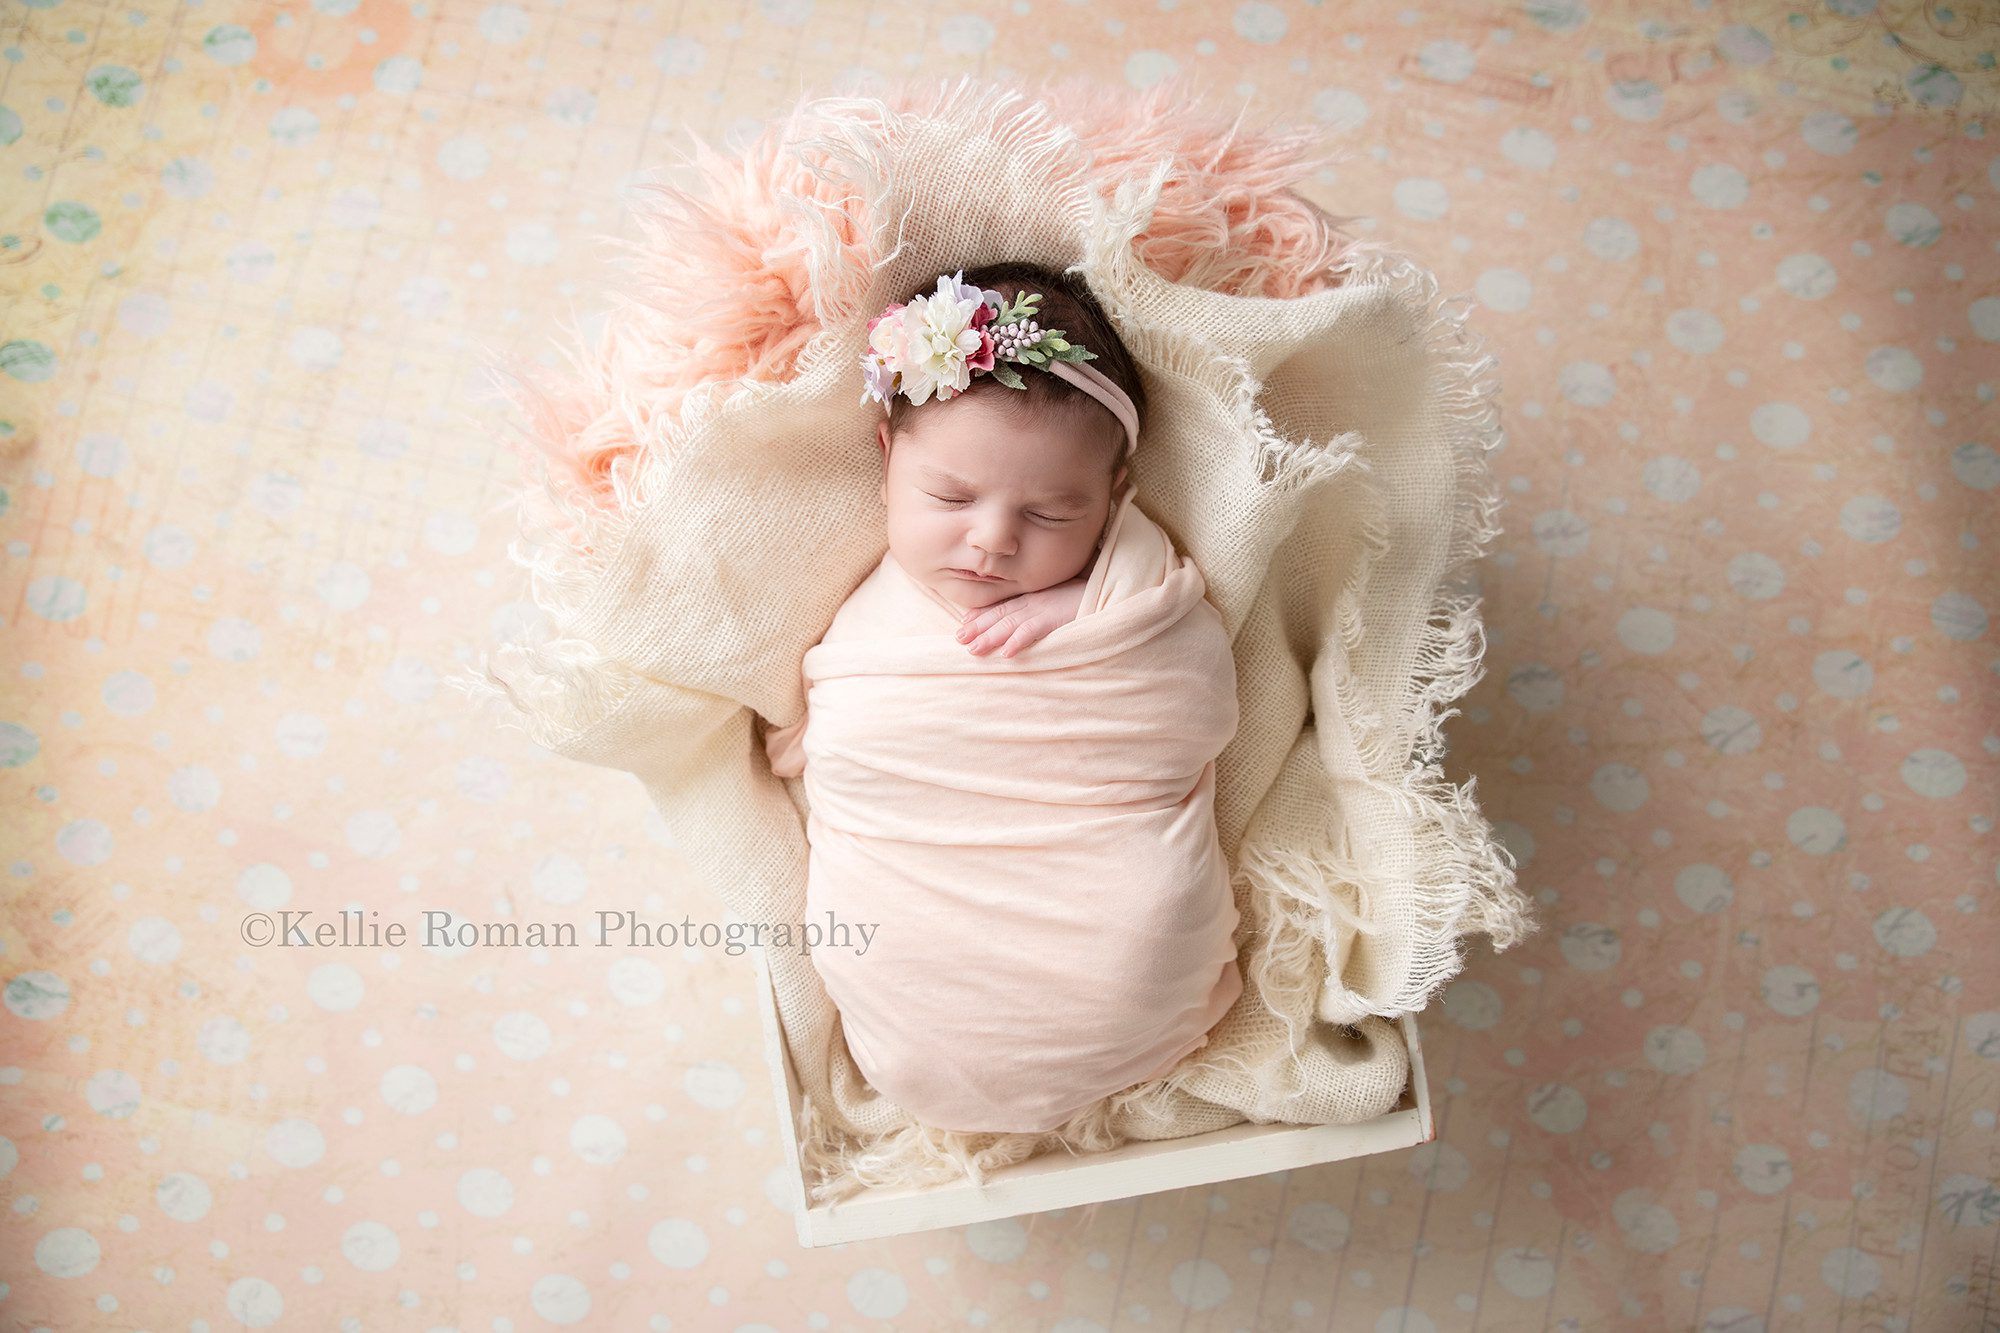 newborn pics a baby girl wrapped in a light peach fabric she is laying onto of cream burlap in a white wood crate the crate is on top of a polka dot peach backdrop the baby has very dark hair and is wearing a headband